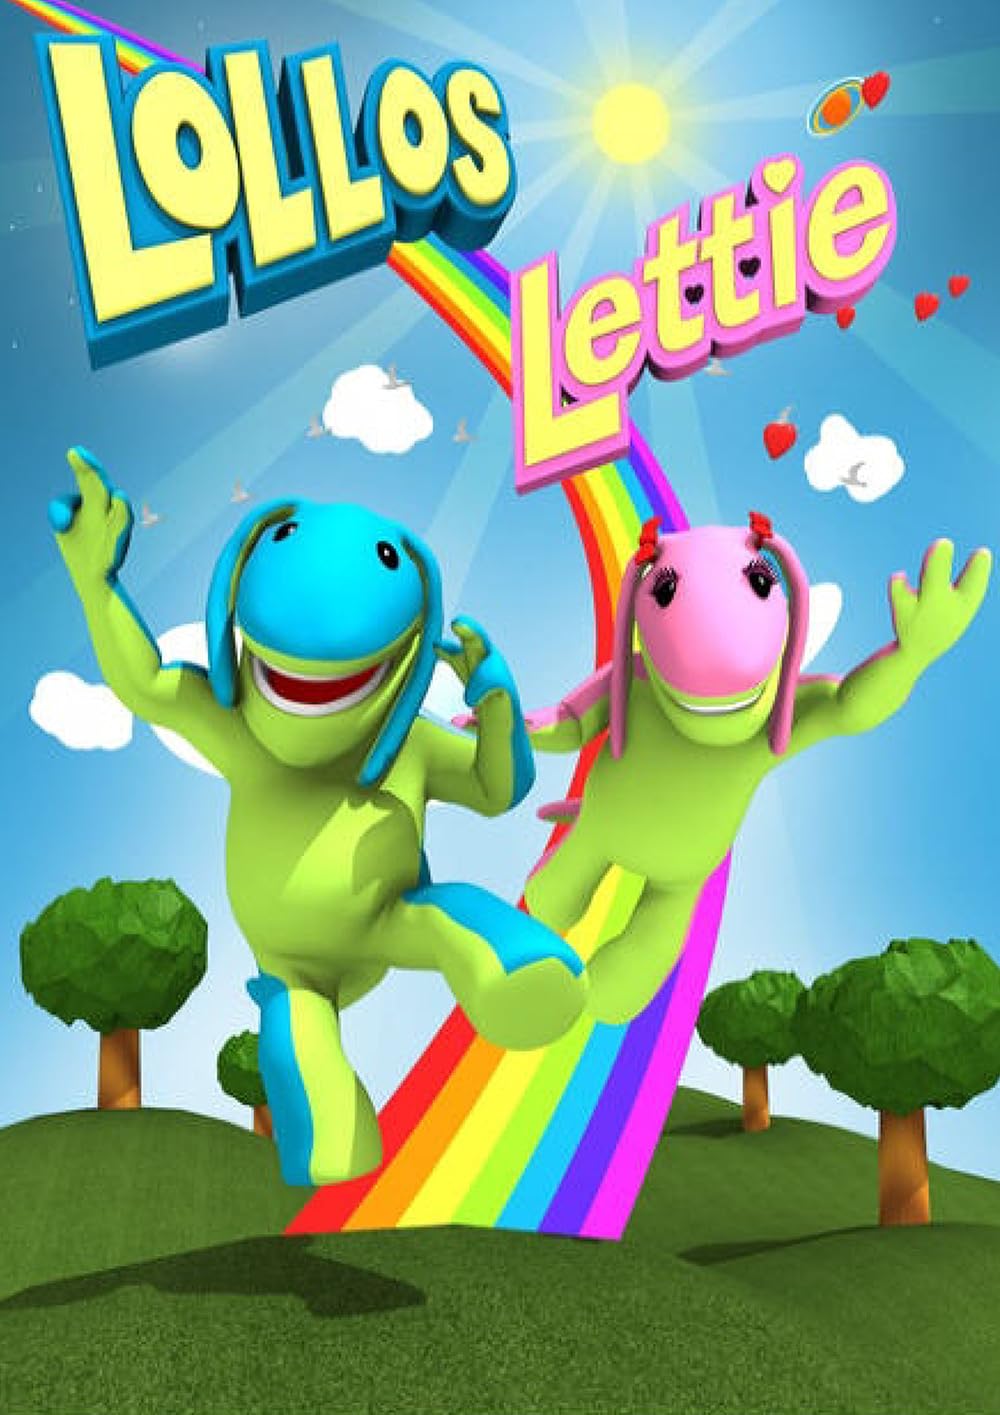 Lollos and Lettie: Tickle Giggle and Wiggle